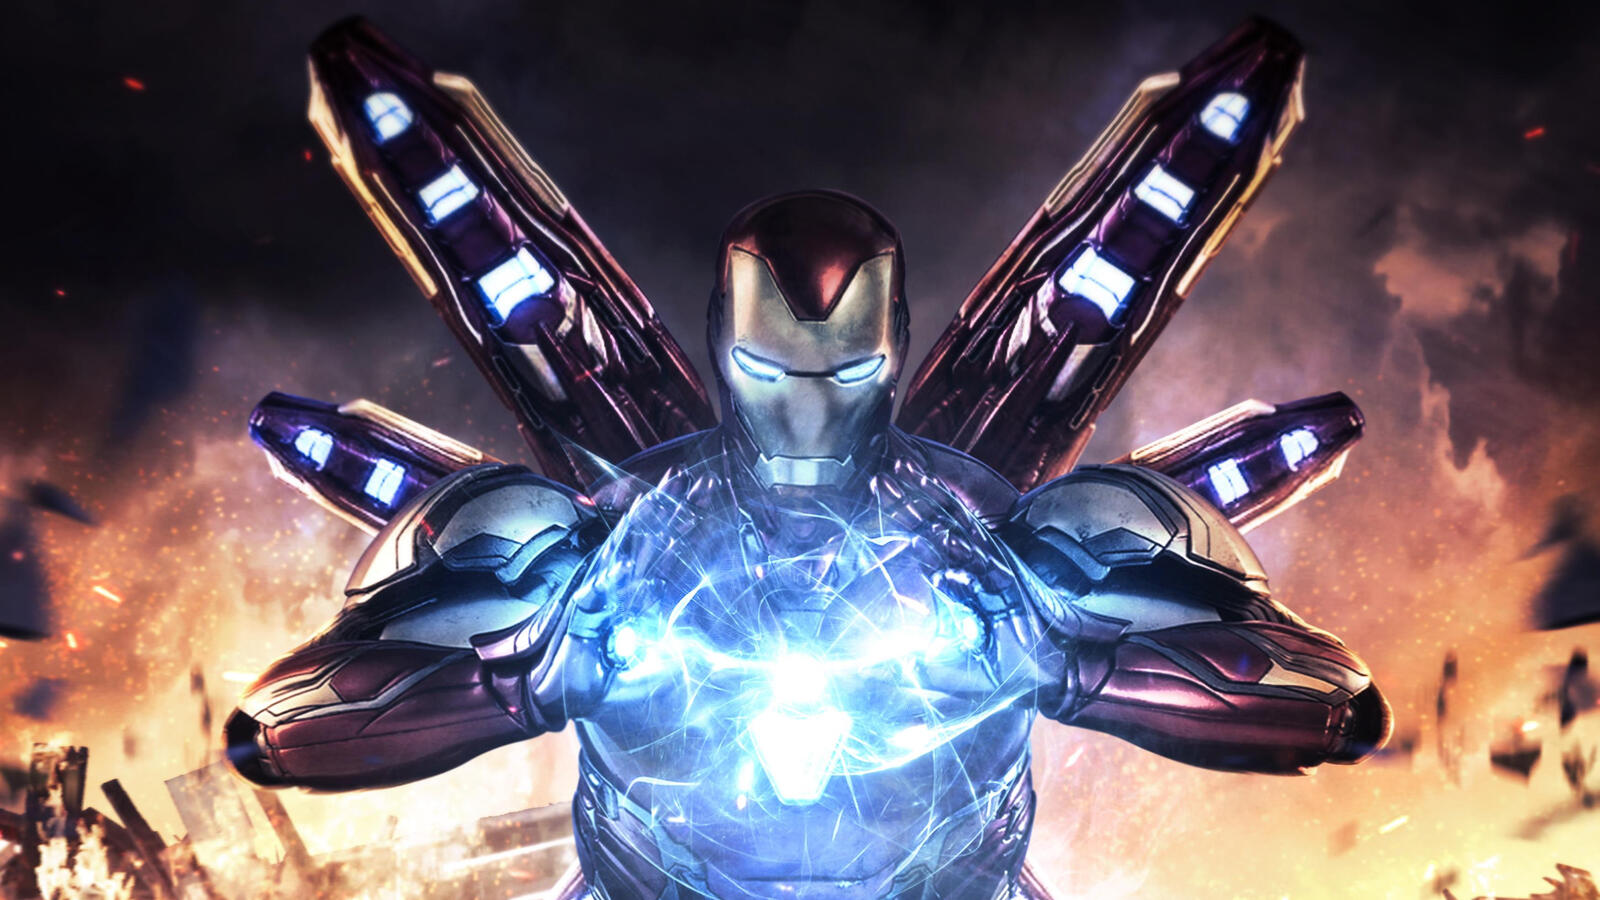 Wallpapers Avengers and Game Iron Man superheroes on the desktop